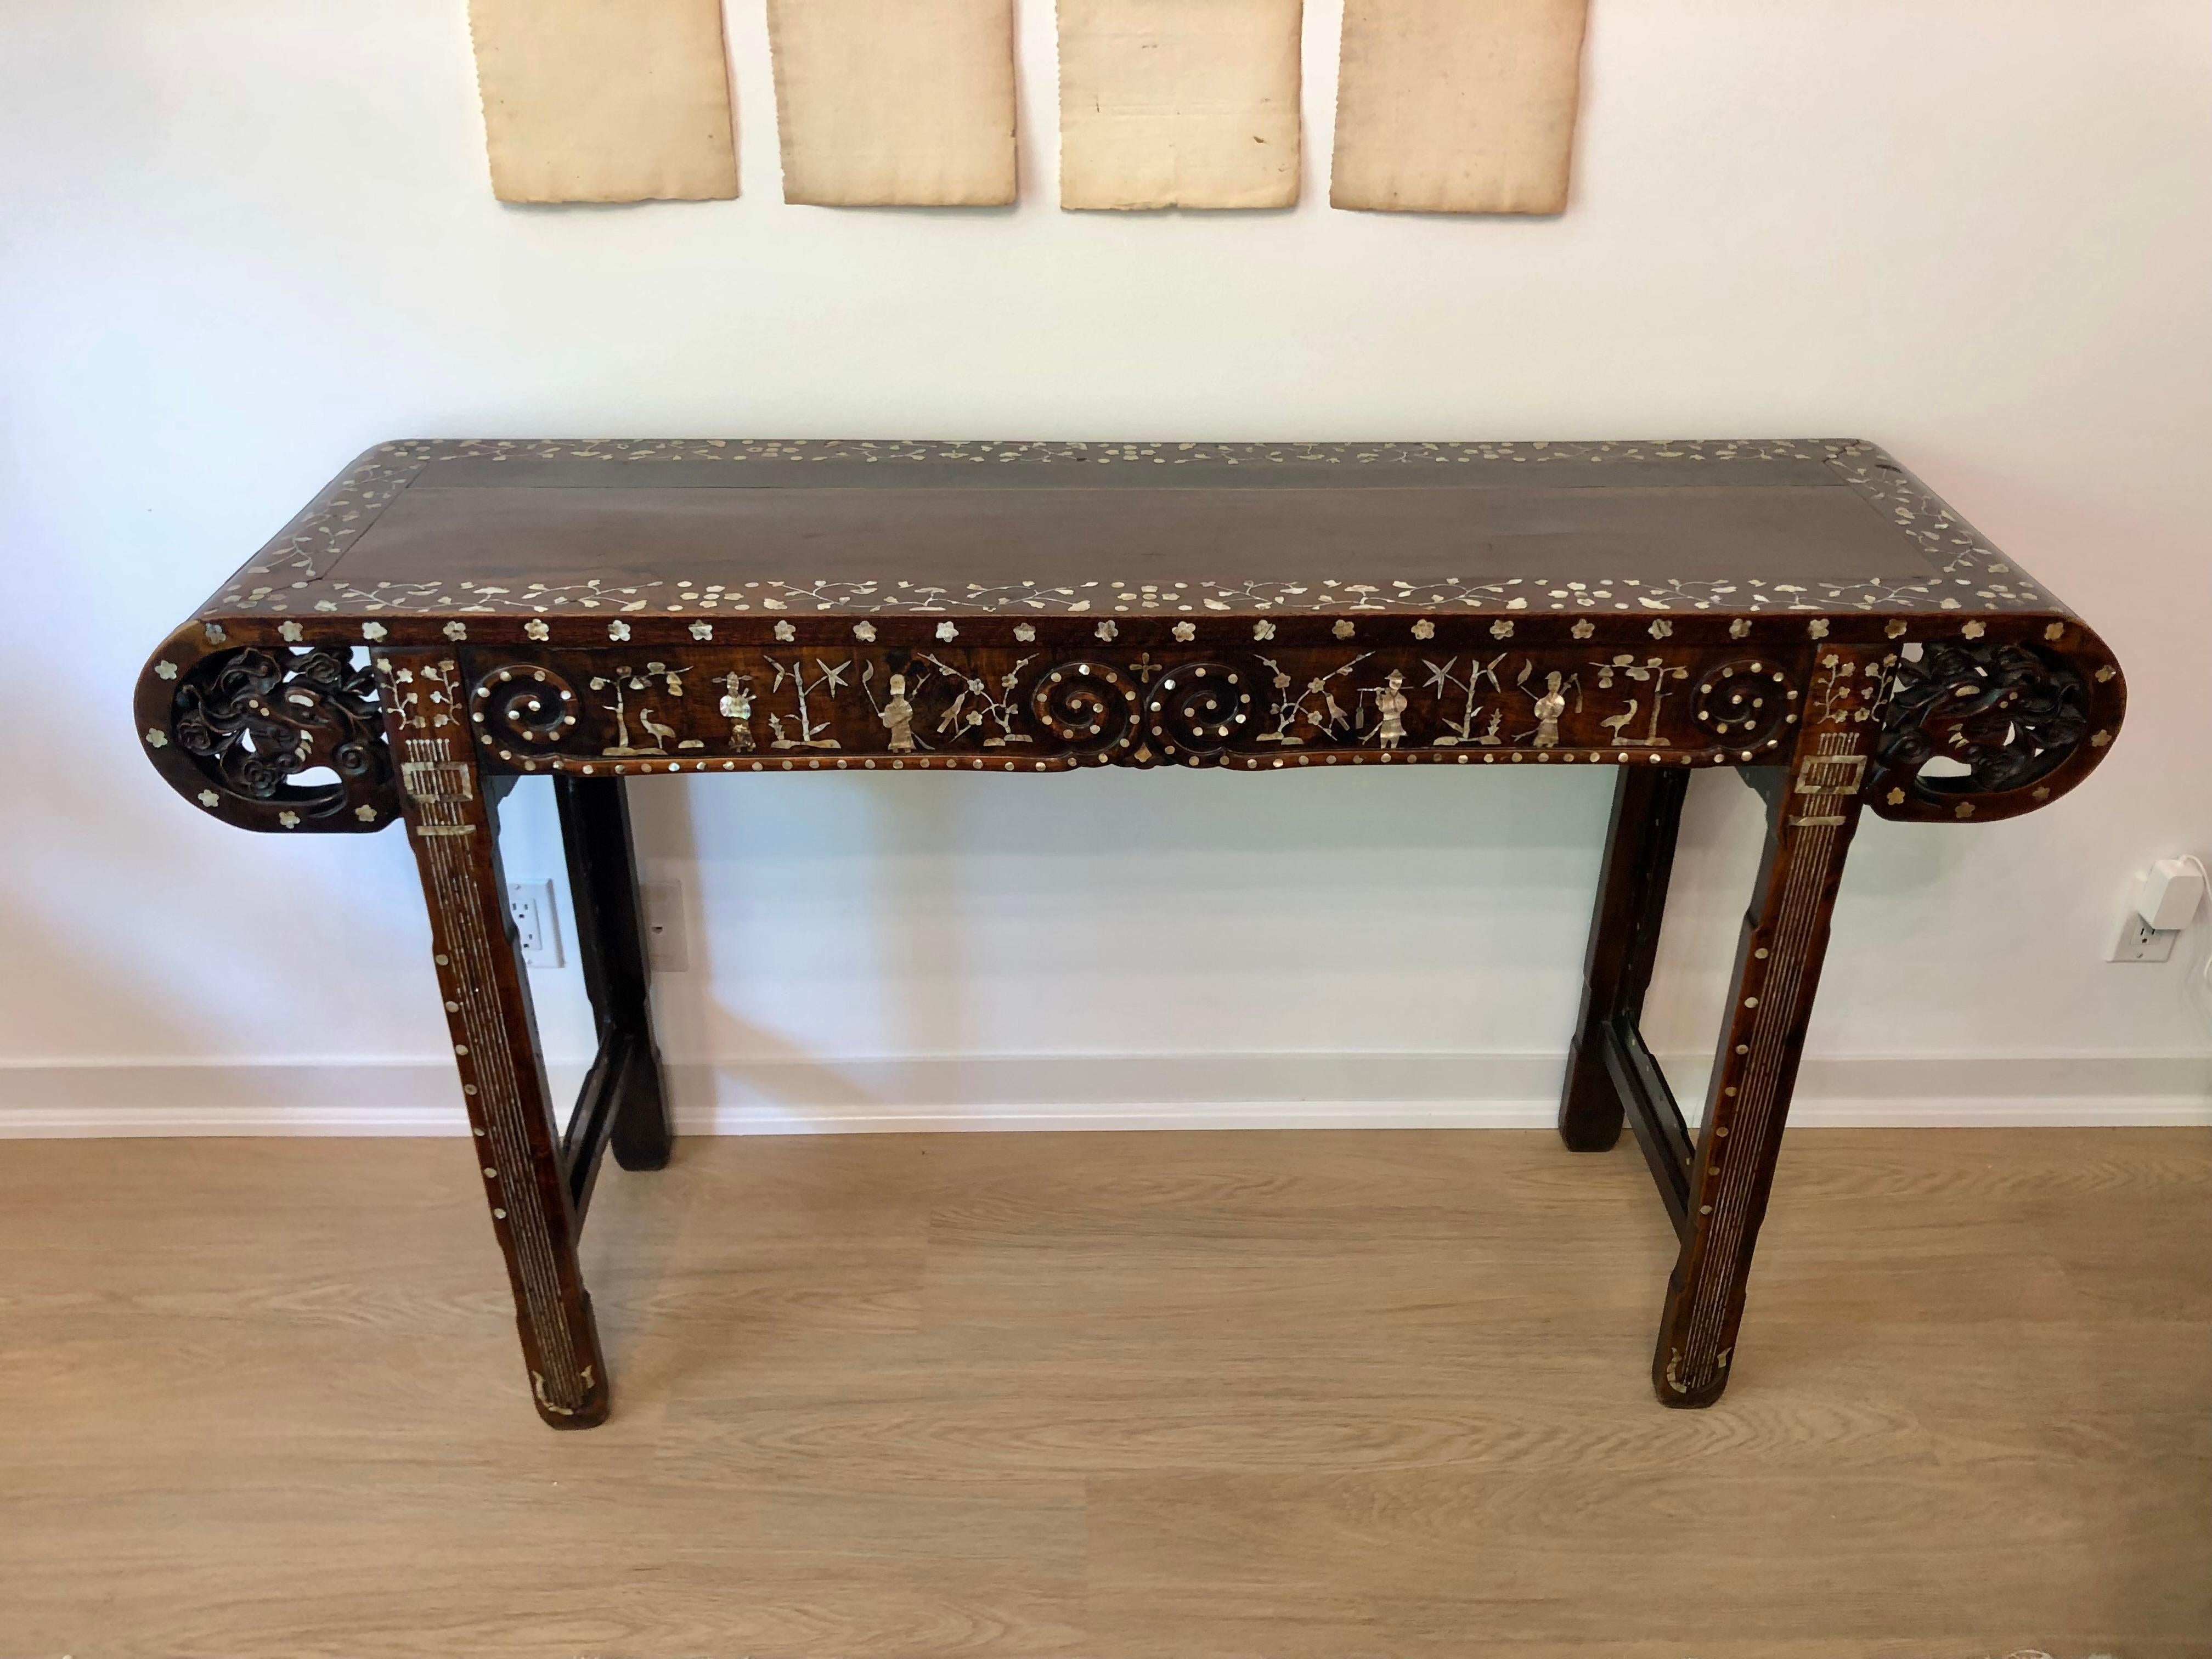 Antique Carved and Inlaid Altar Table, Chinoiserie, 19th Century For Sale 5